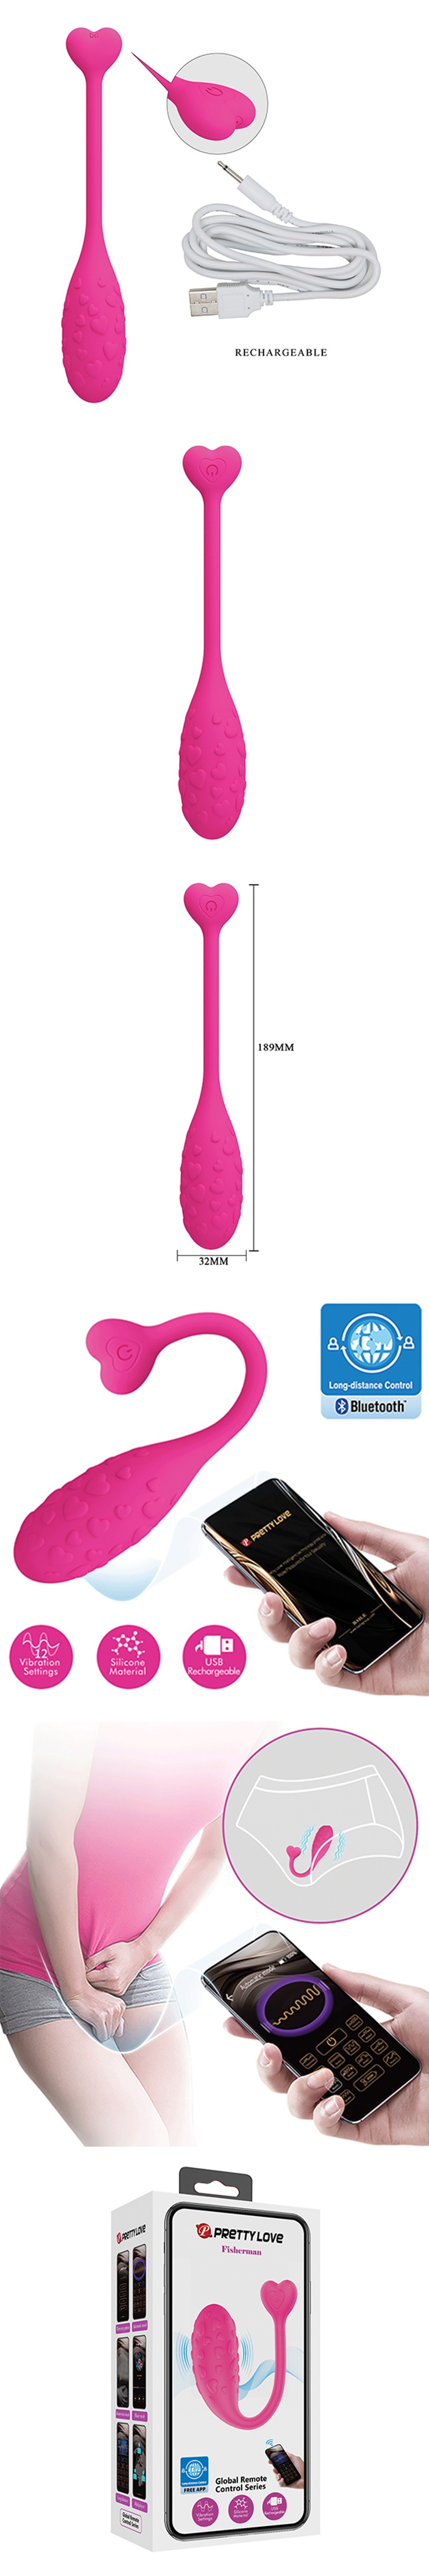 Pretty Love Fisherman Hot Pink Vibrating Egg with APP Remote